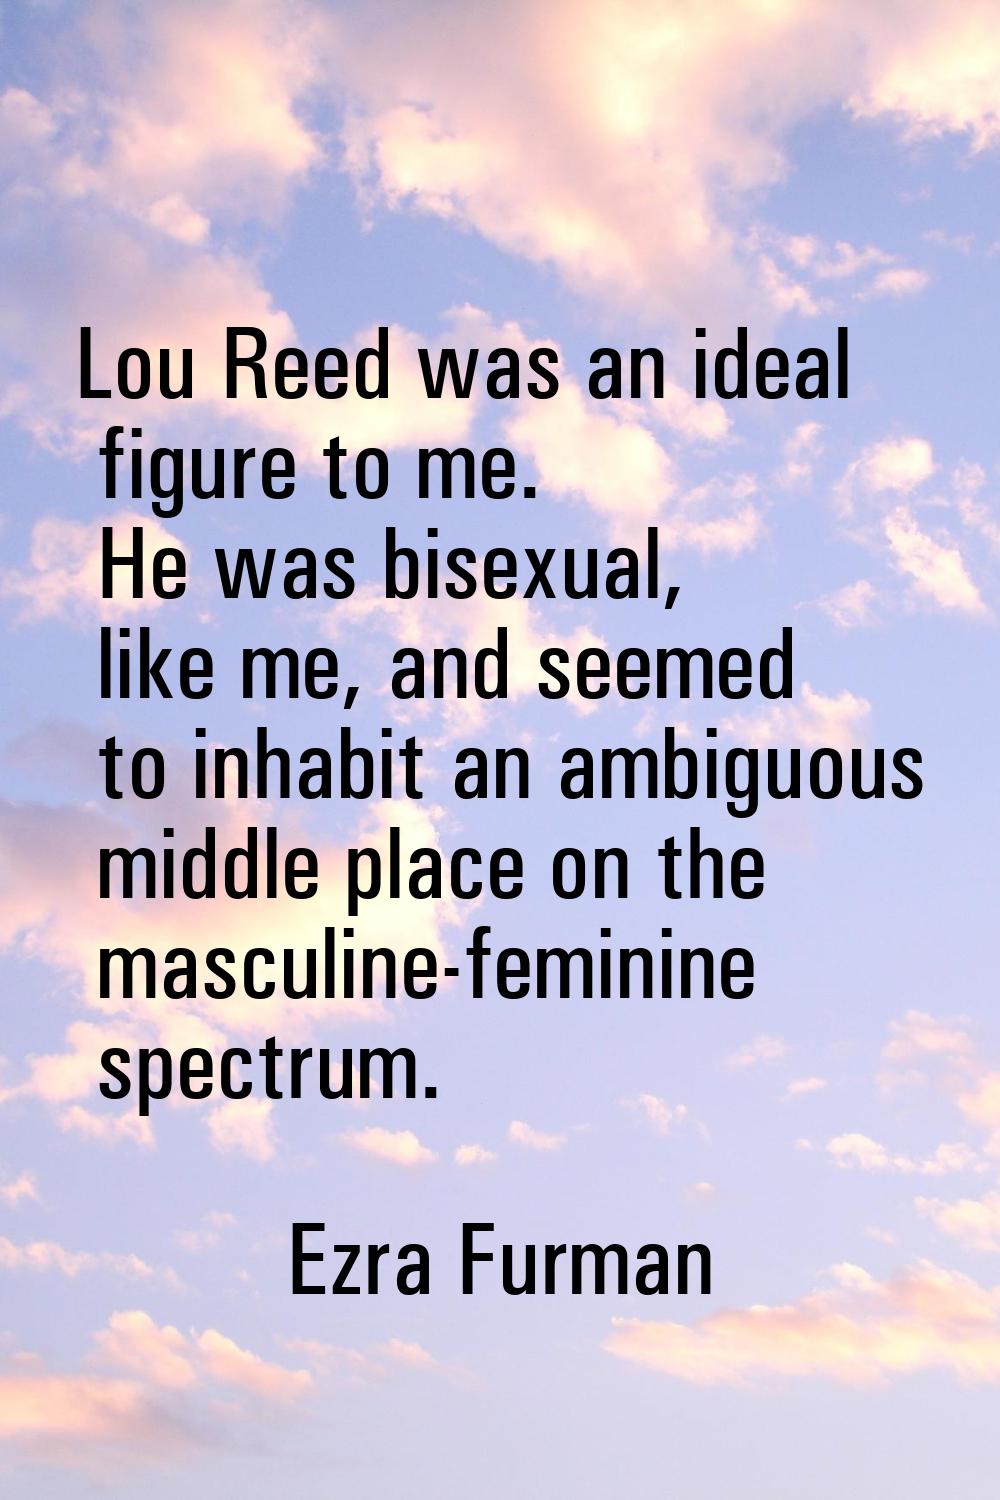 Lou Reed was an ideal figure to me. He was bisexual, like me, and seemed to inhabit an ambiguous mi